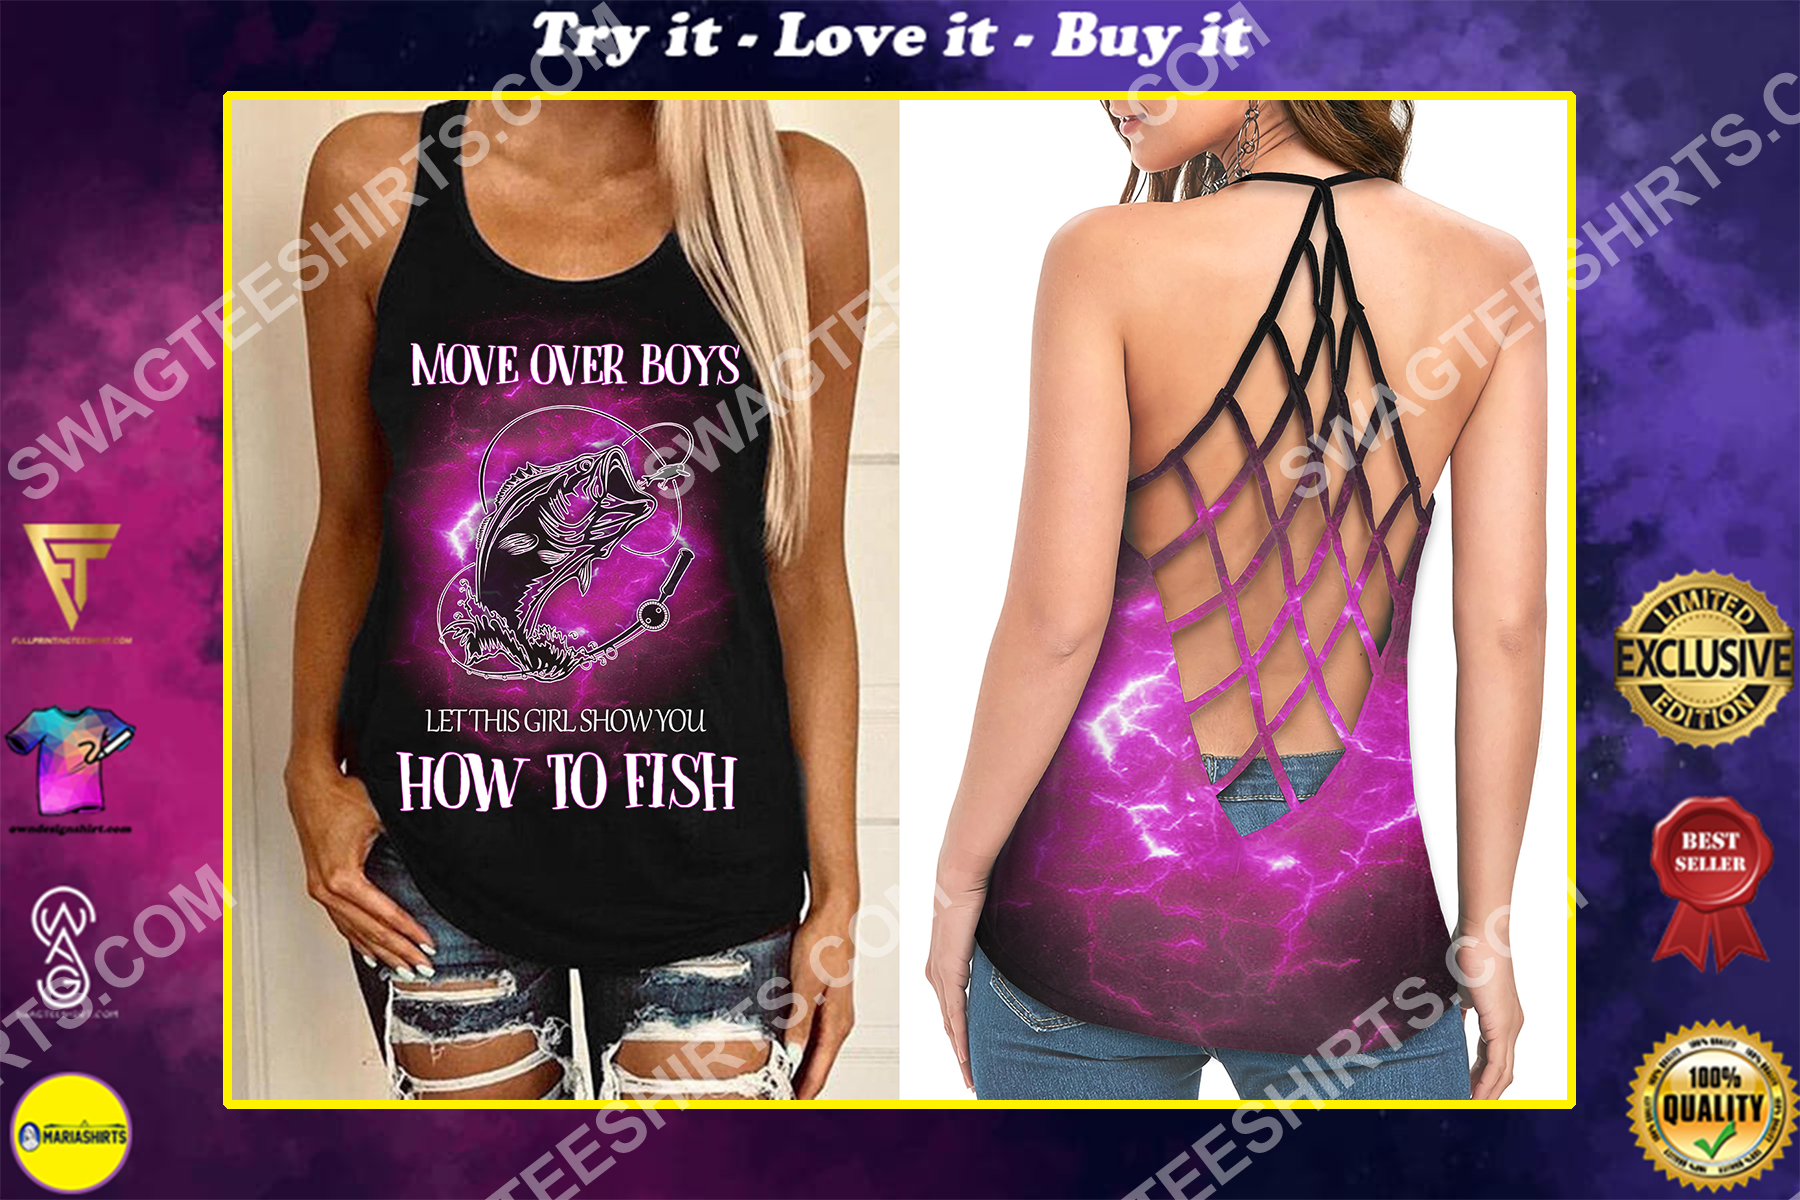 more over boys let this girl show you how to fish strappy back tank top